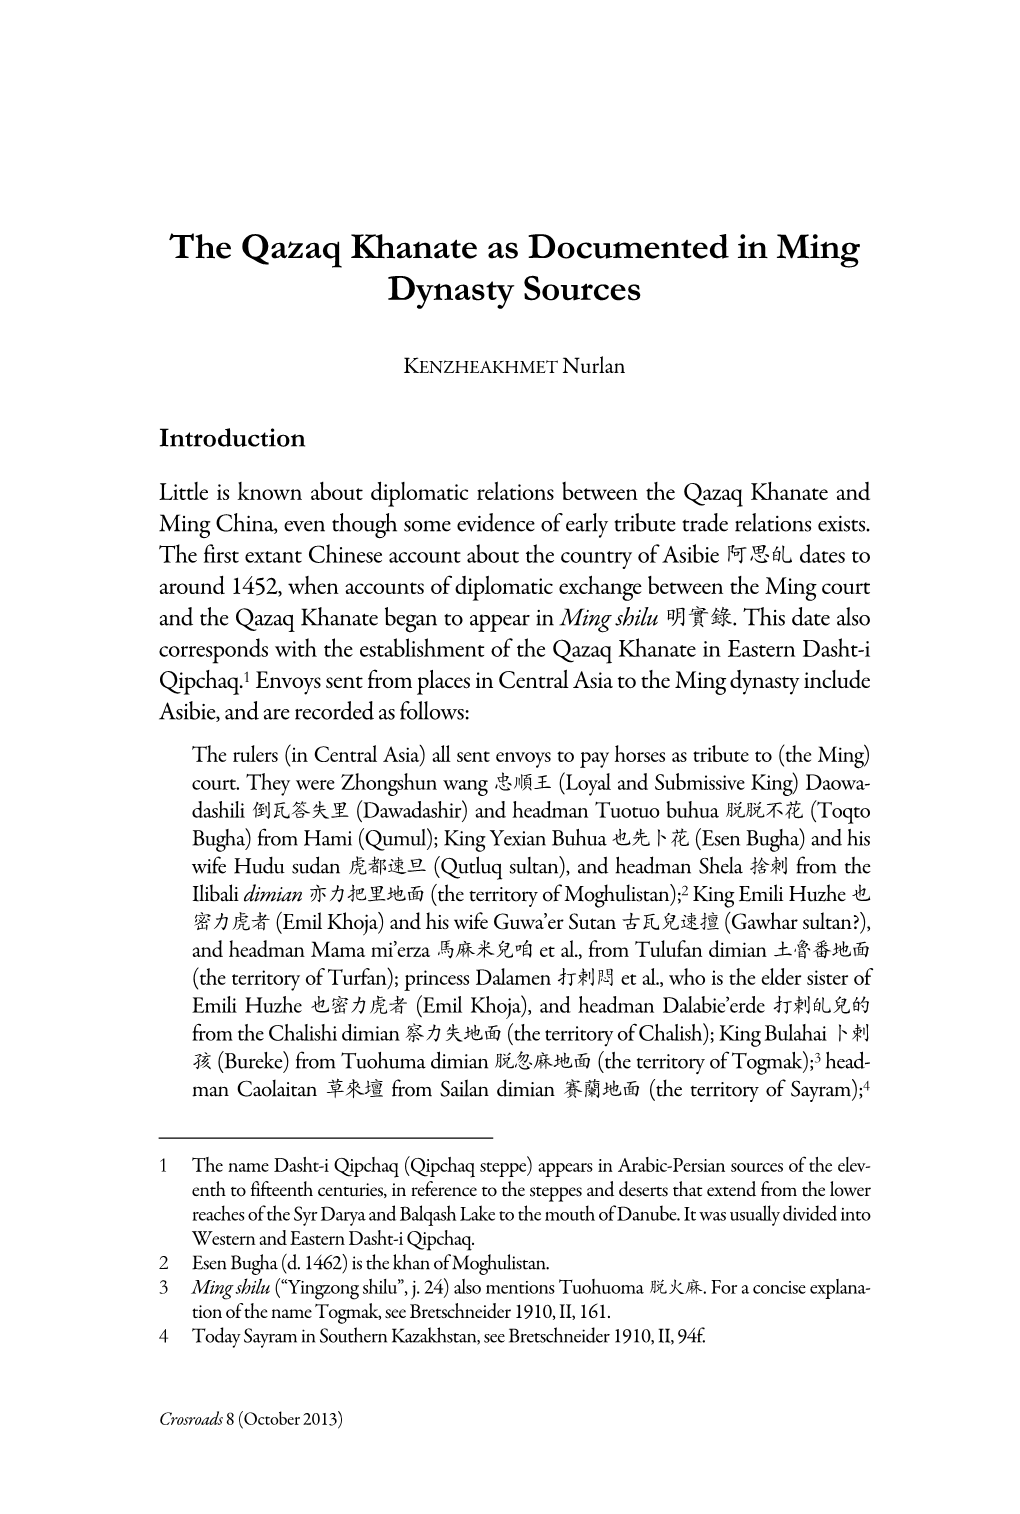 The Qazaq Khanate As Documented in Ming Dynasty Sources